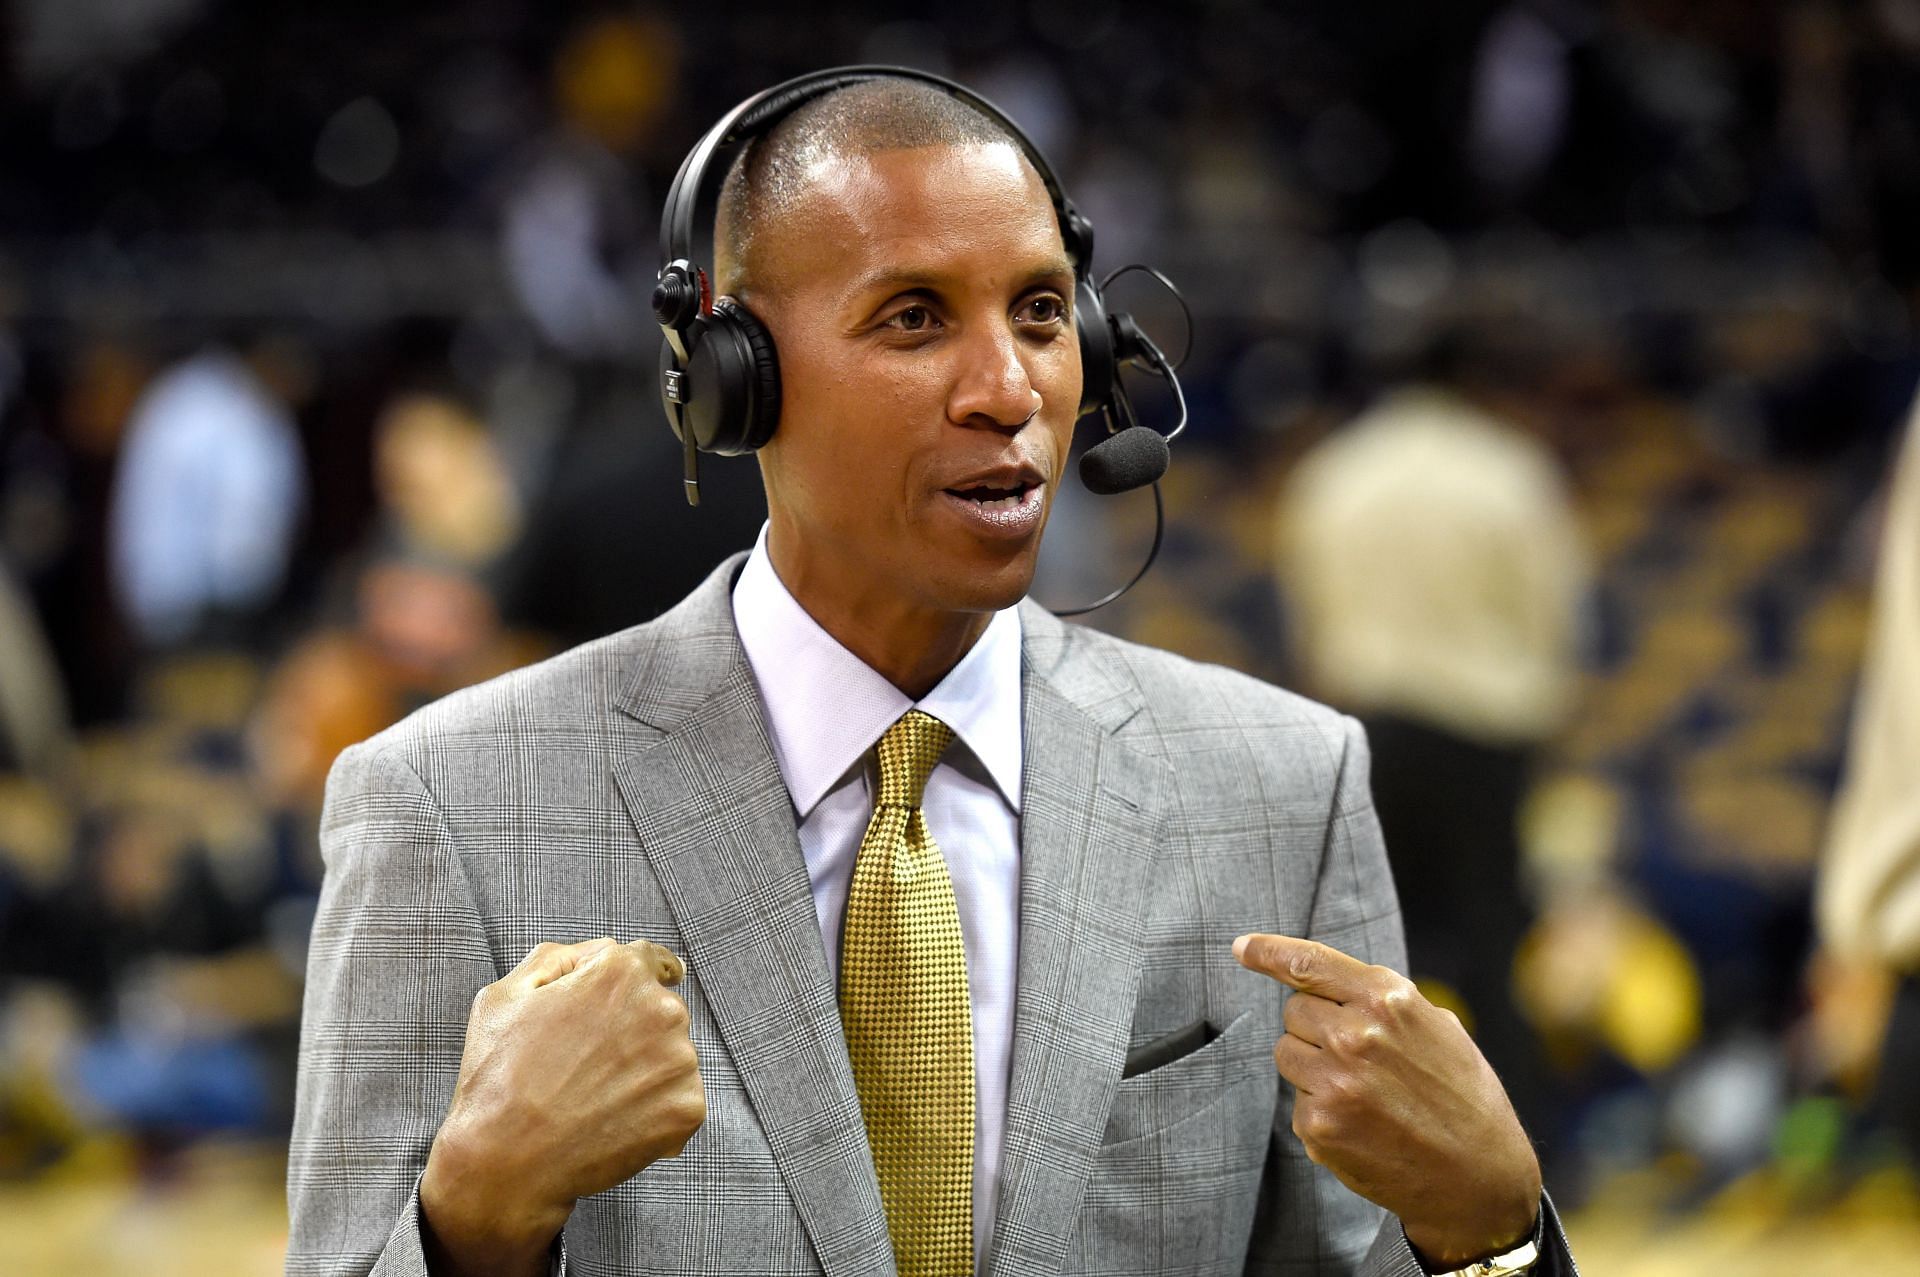 Despite being a prominent commentator today, Reggie Miller is one of the greatest three-point shooters.